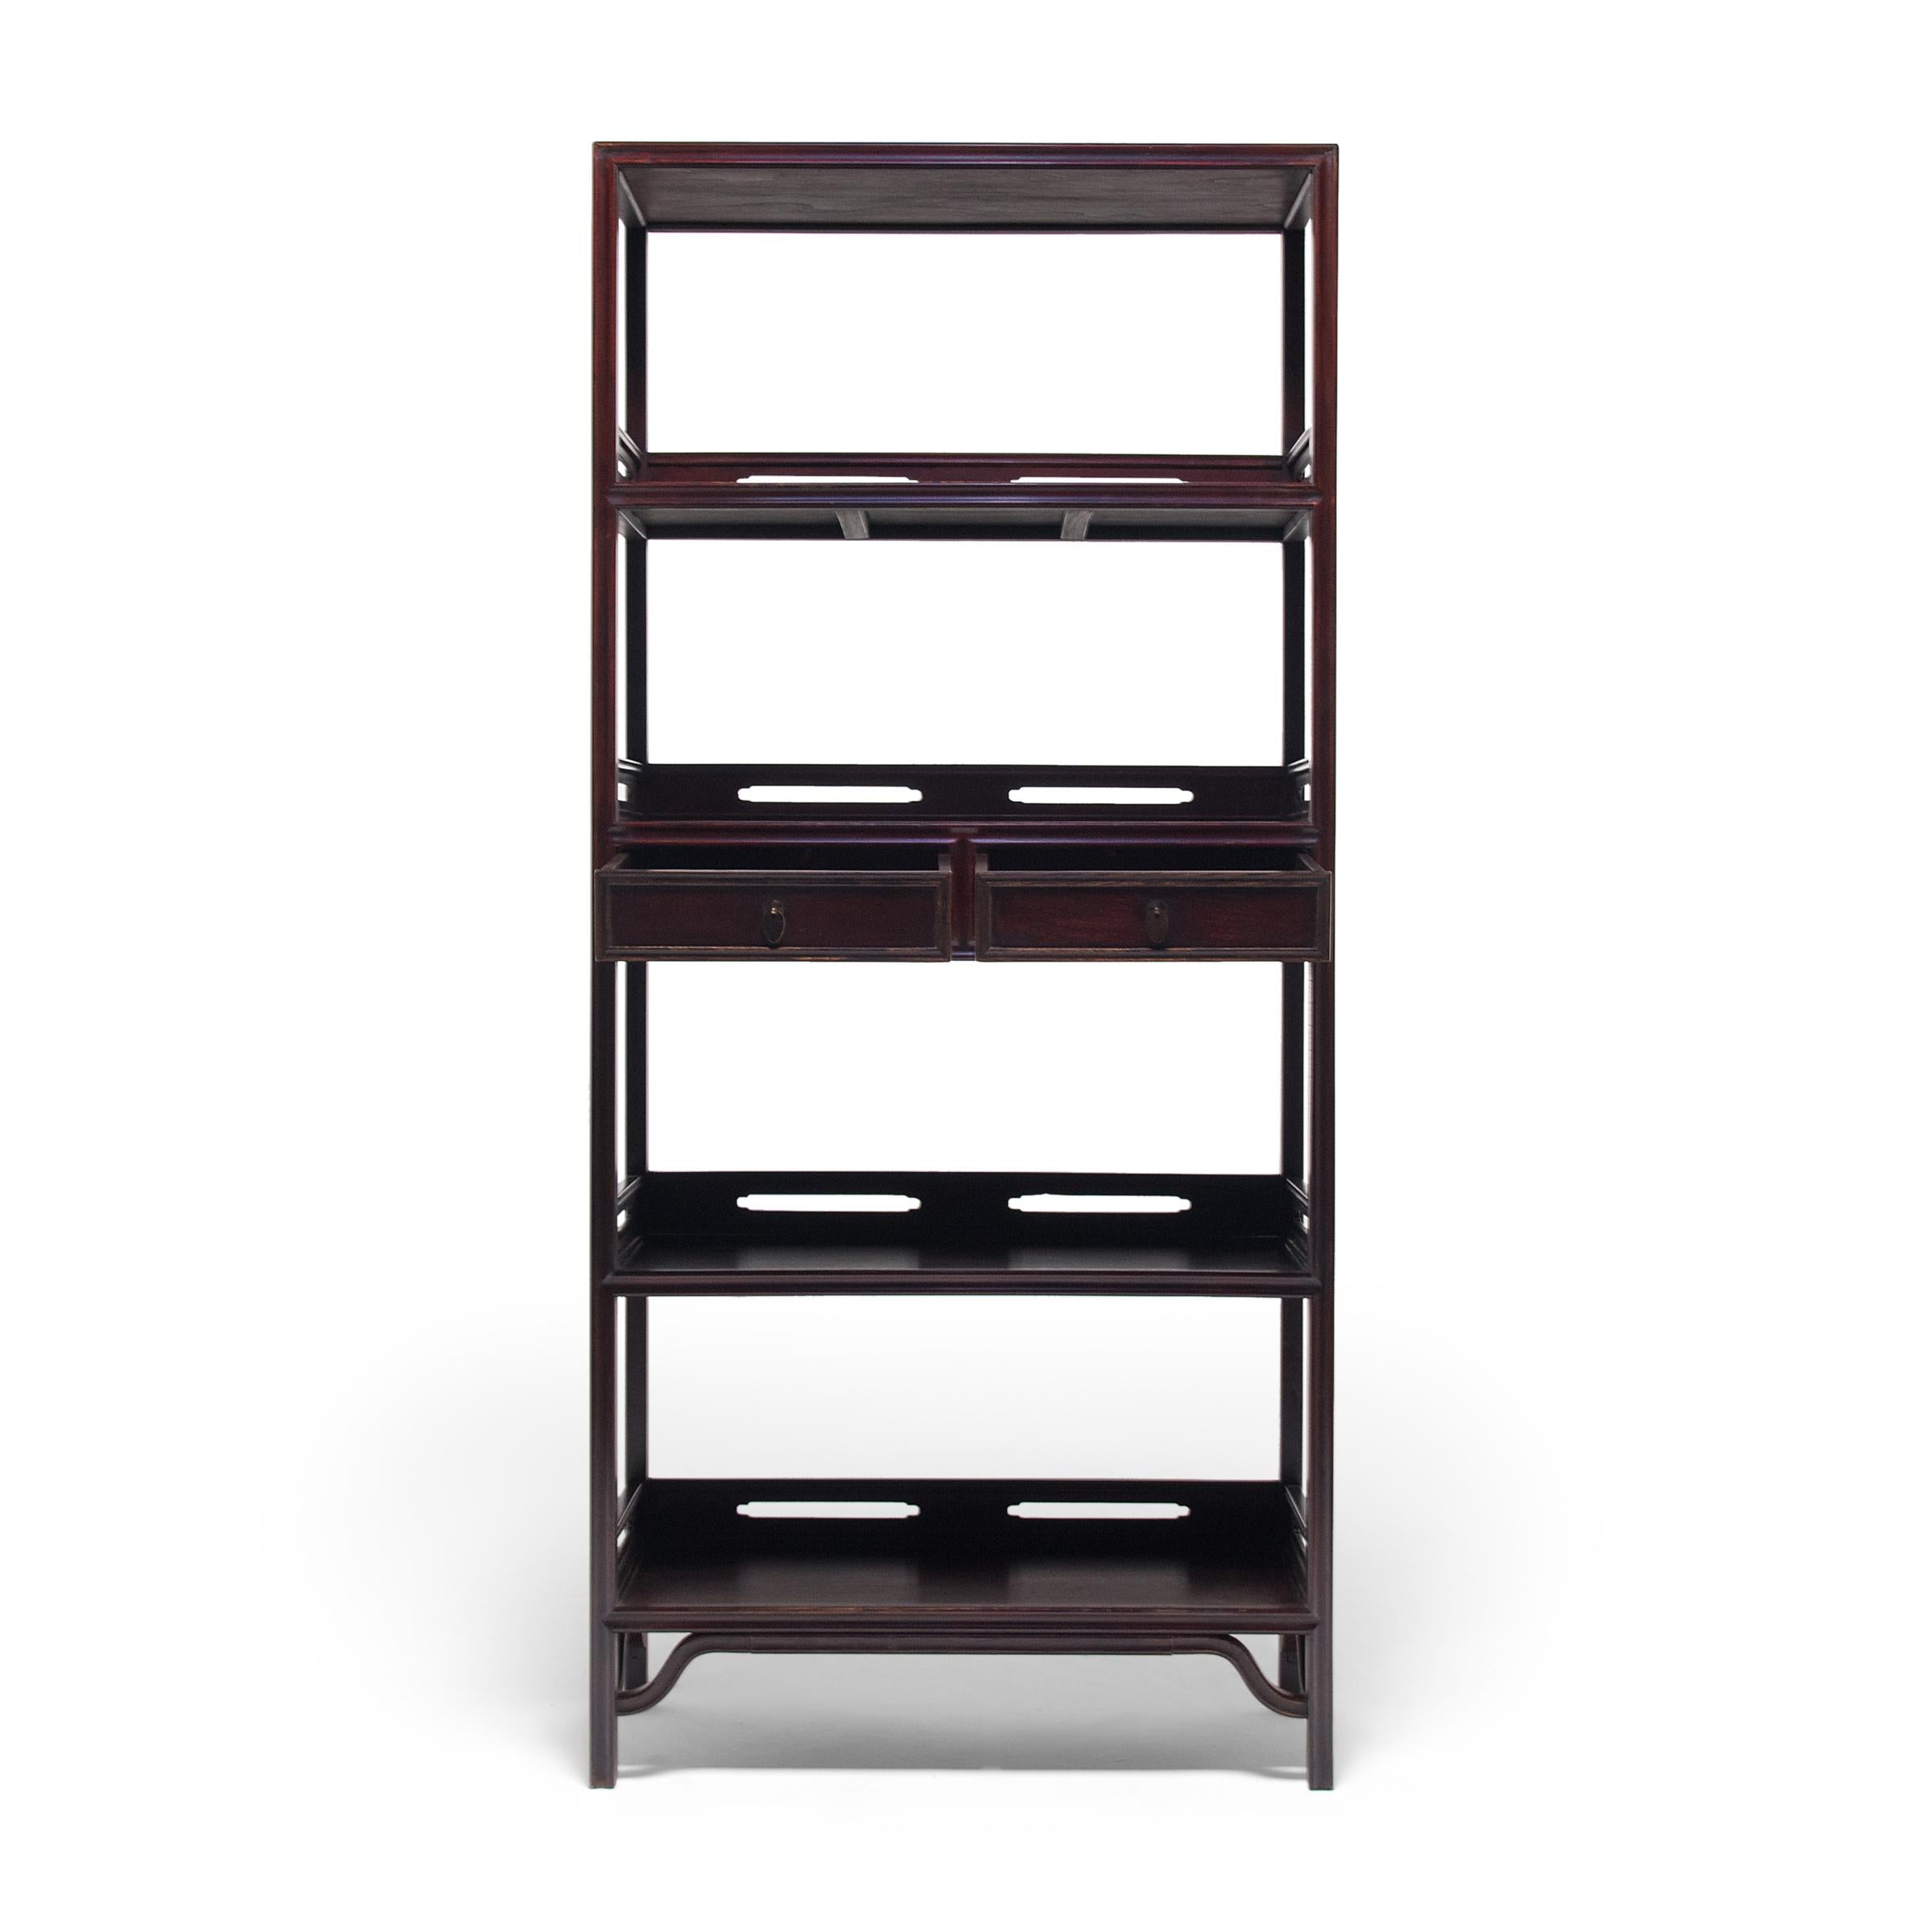 This early 20th century bookcase once stood in a Qing-dynasty scholars' studio, piled high with books and painted scrolls. Considered a status symbol, books were given pride of place on impressive shelves such as this, alongside precious objects and